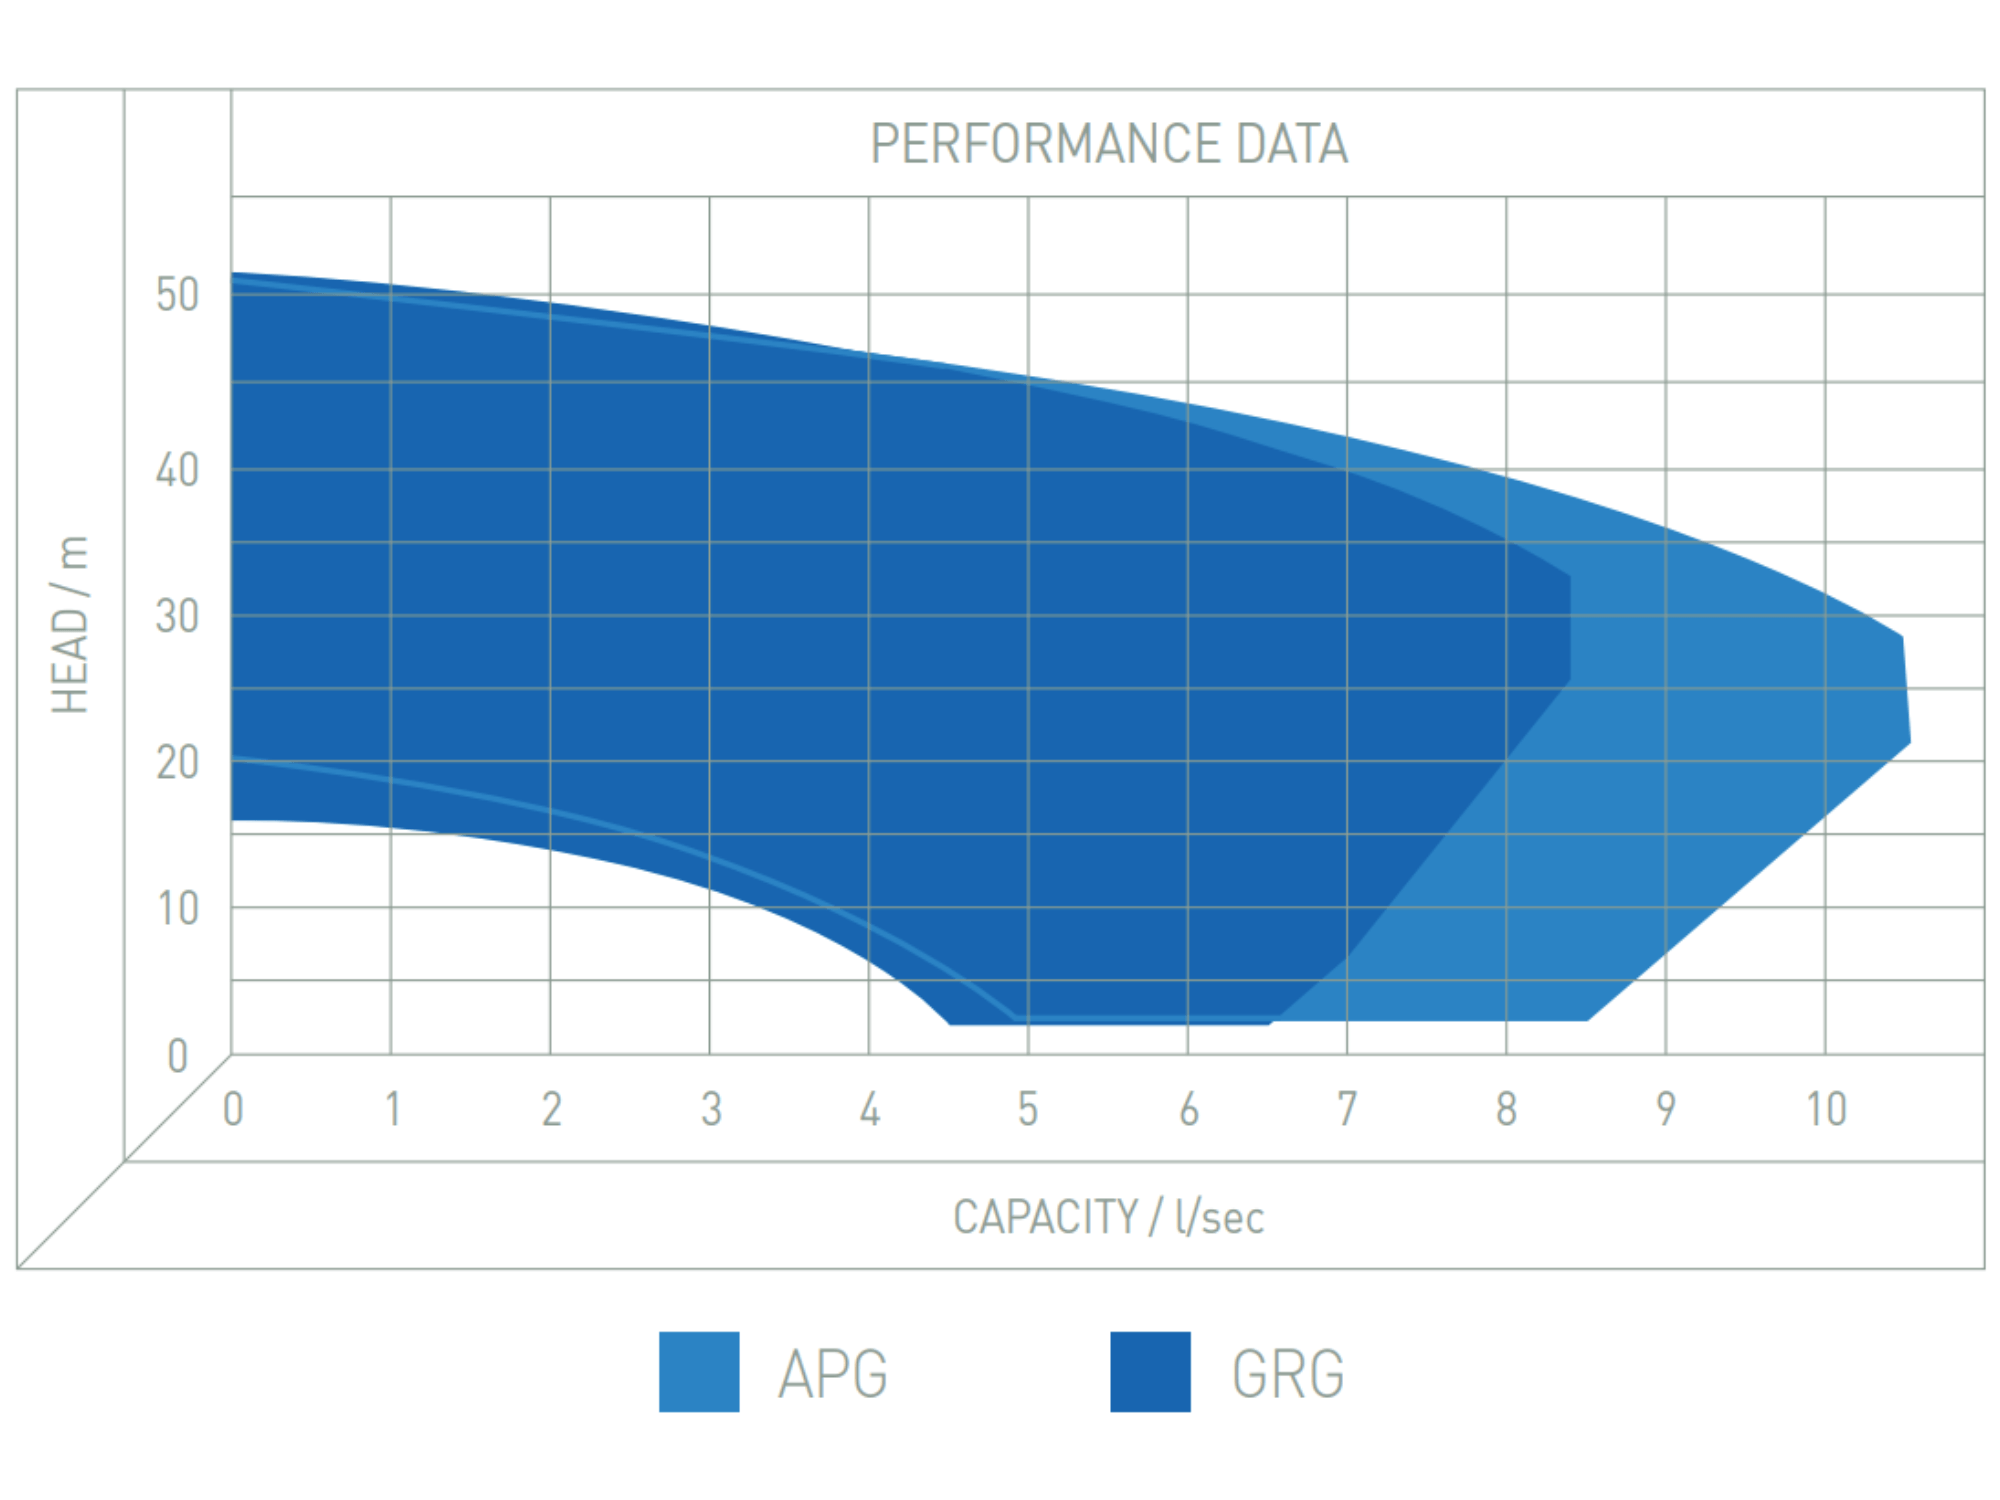 A graph showing the operating performance for Zenit's GRG and APG electric submersible pumps from the Grey Series.